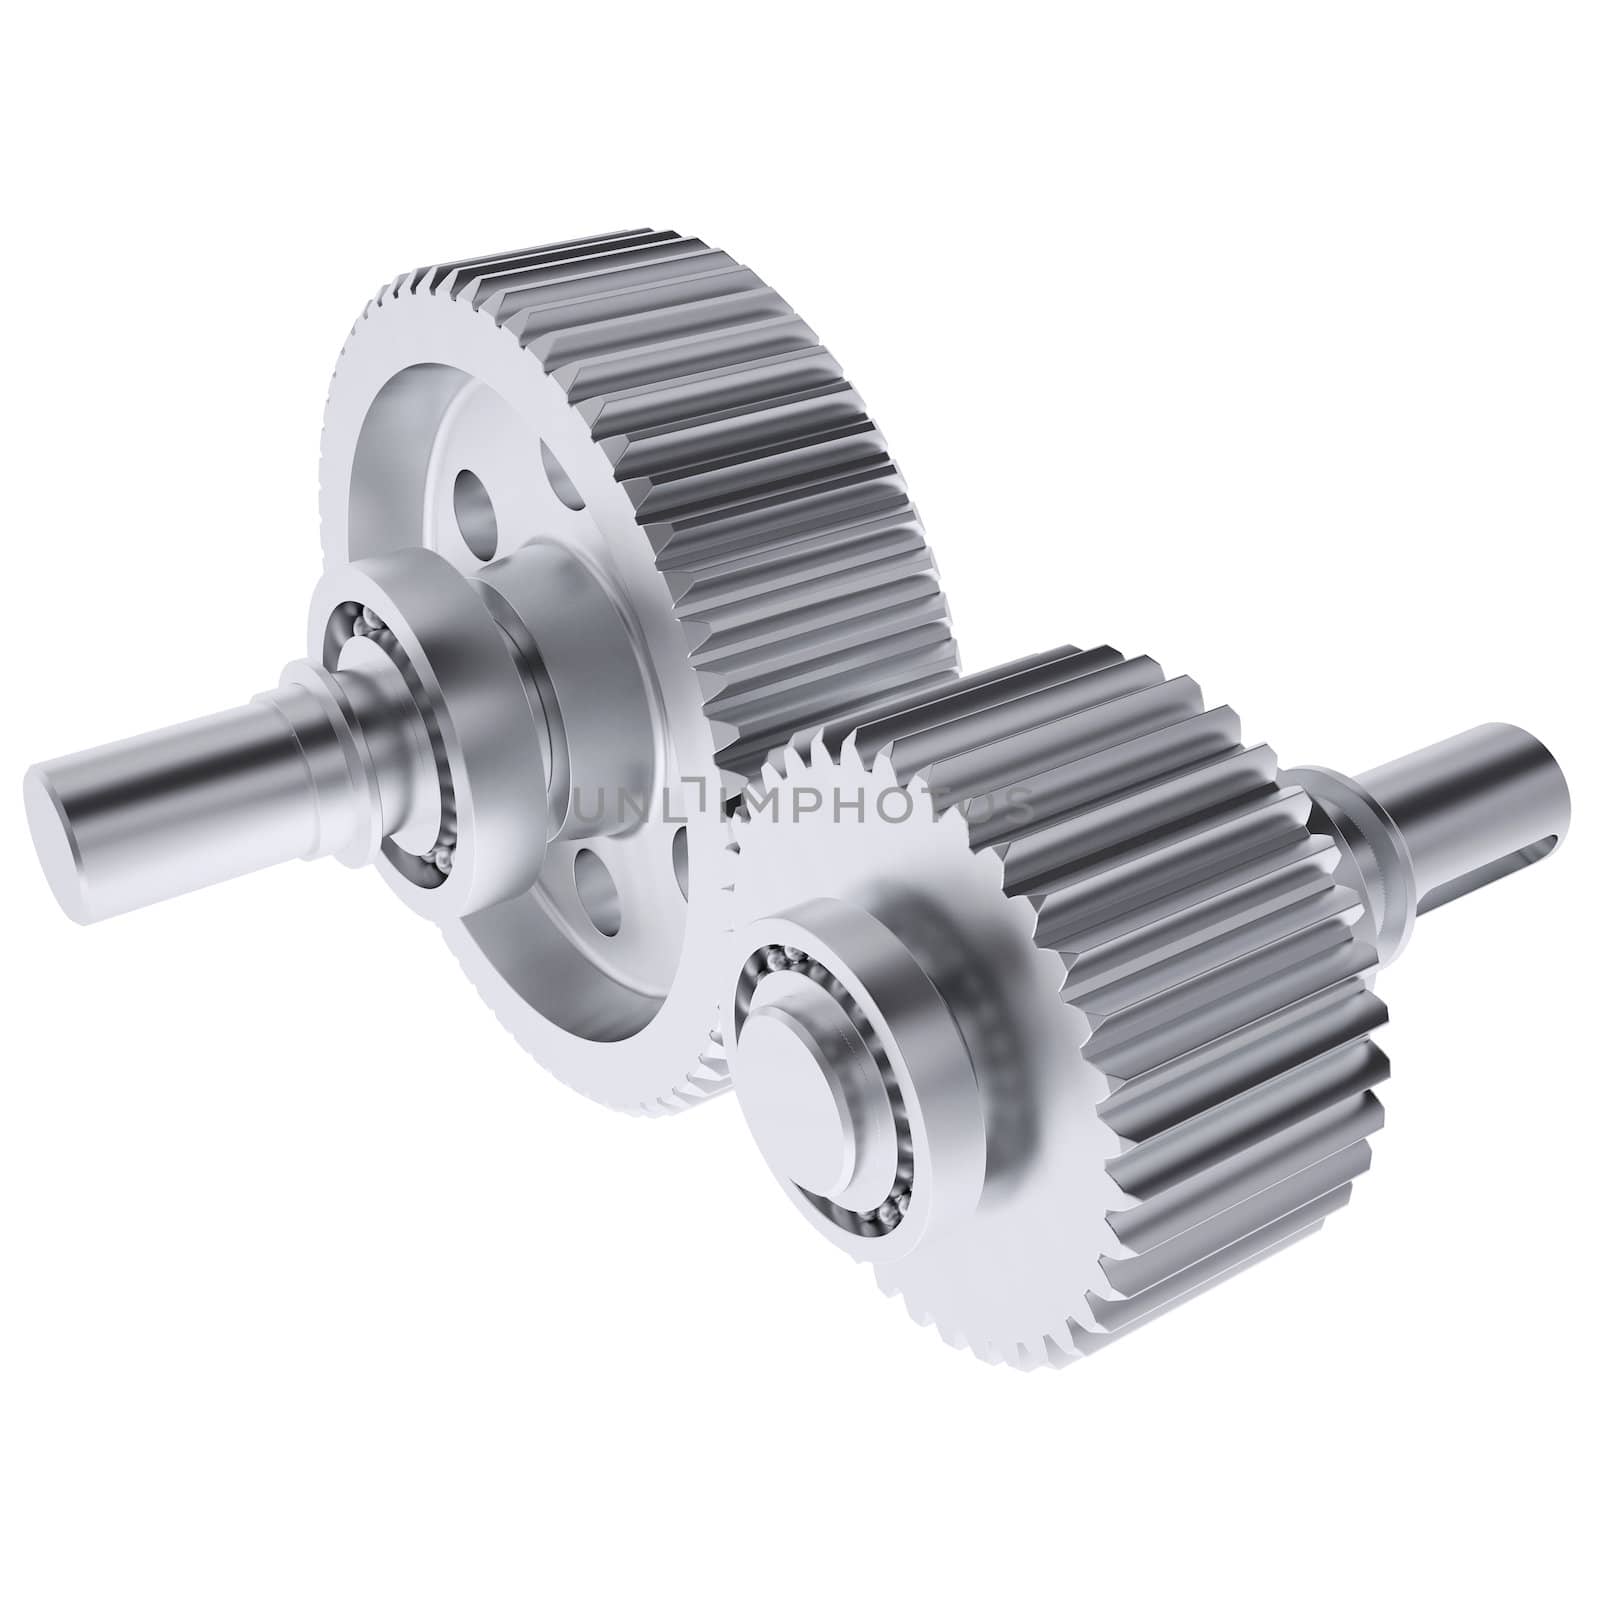 Metal shafts, gears and bearings. 3d render isolated on white background